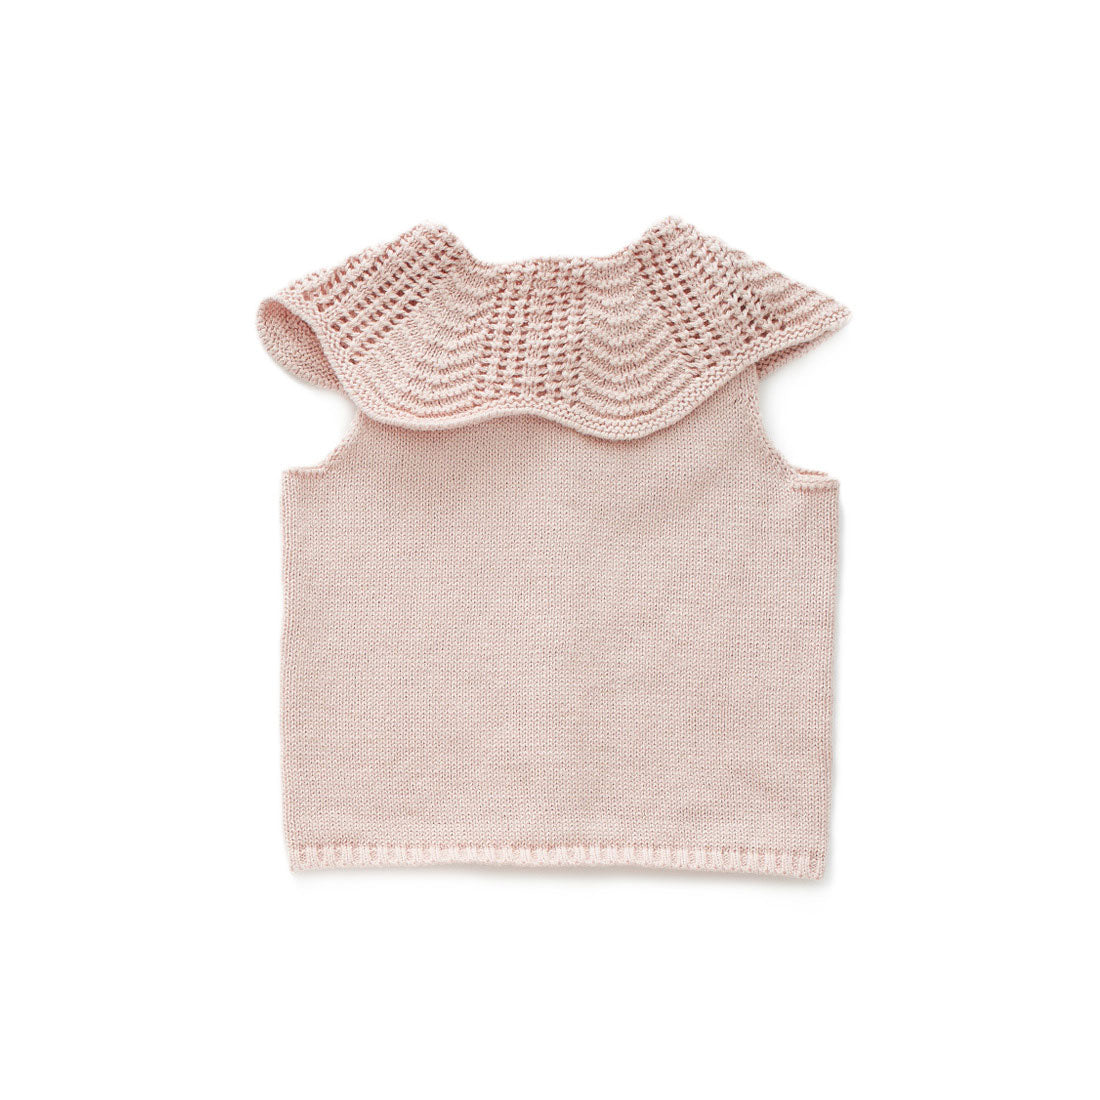 Oeuf Light Pink Scalloped Collar Knit Vest